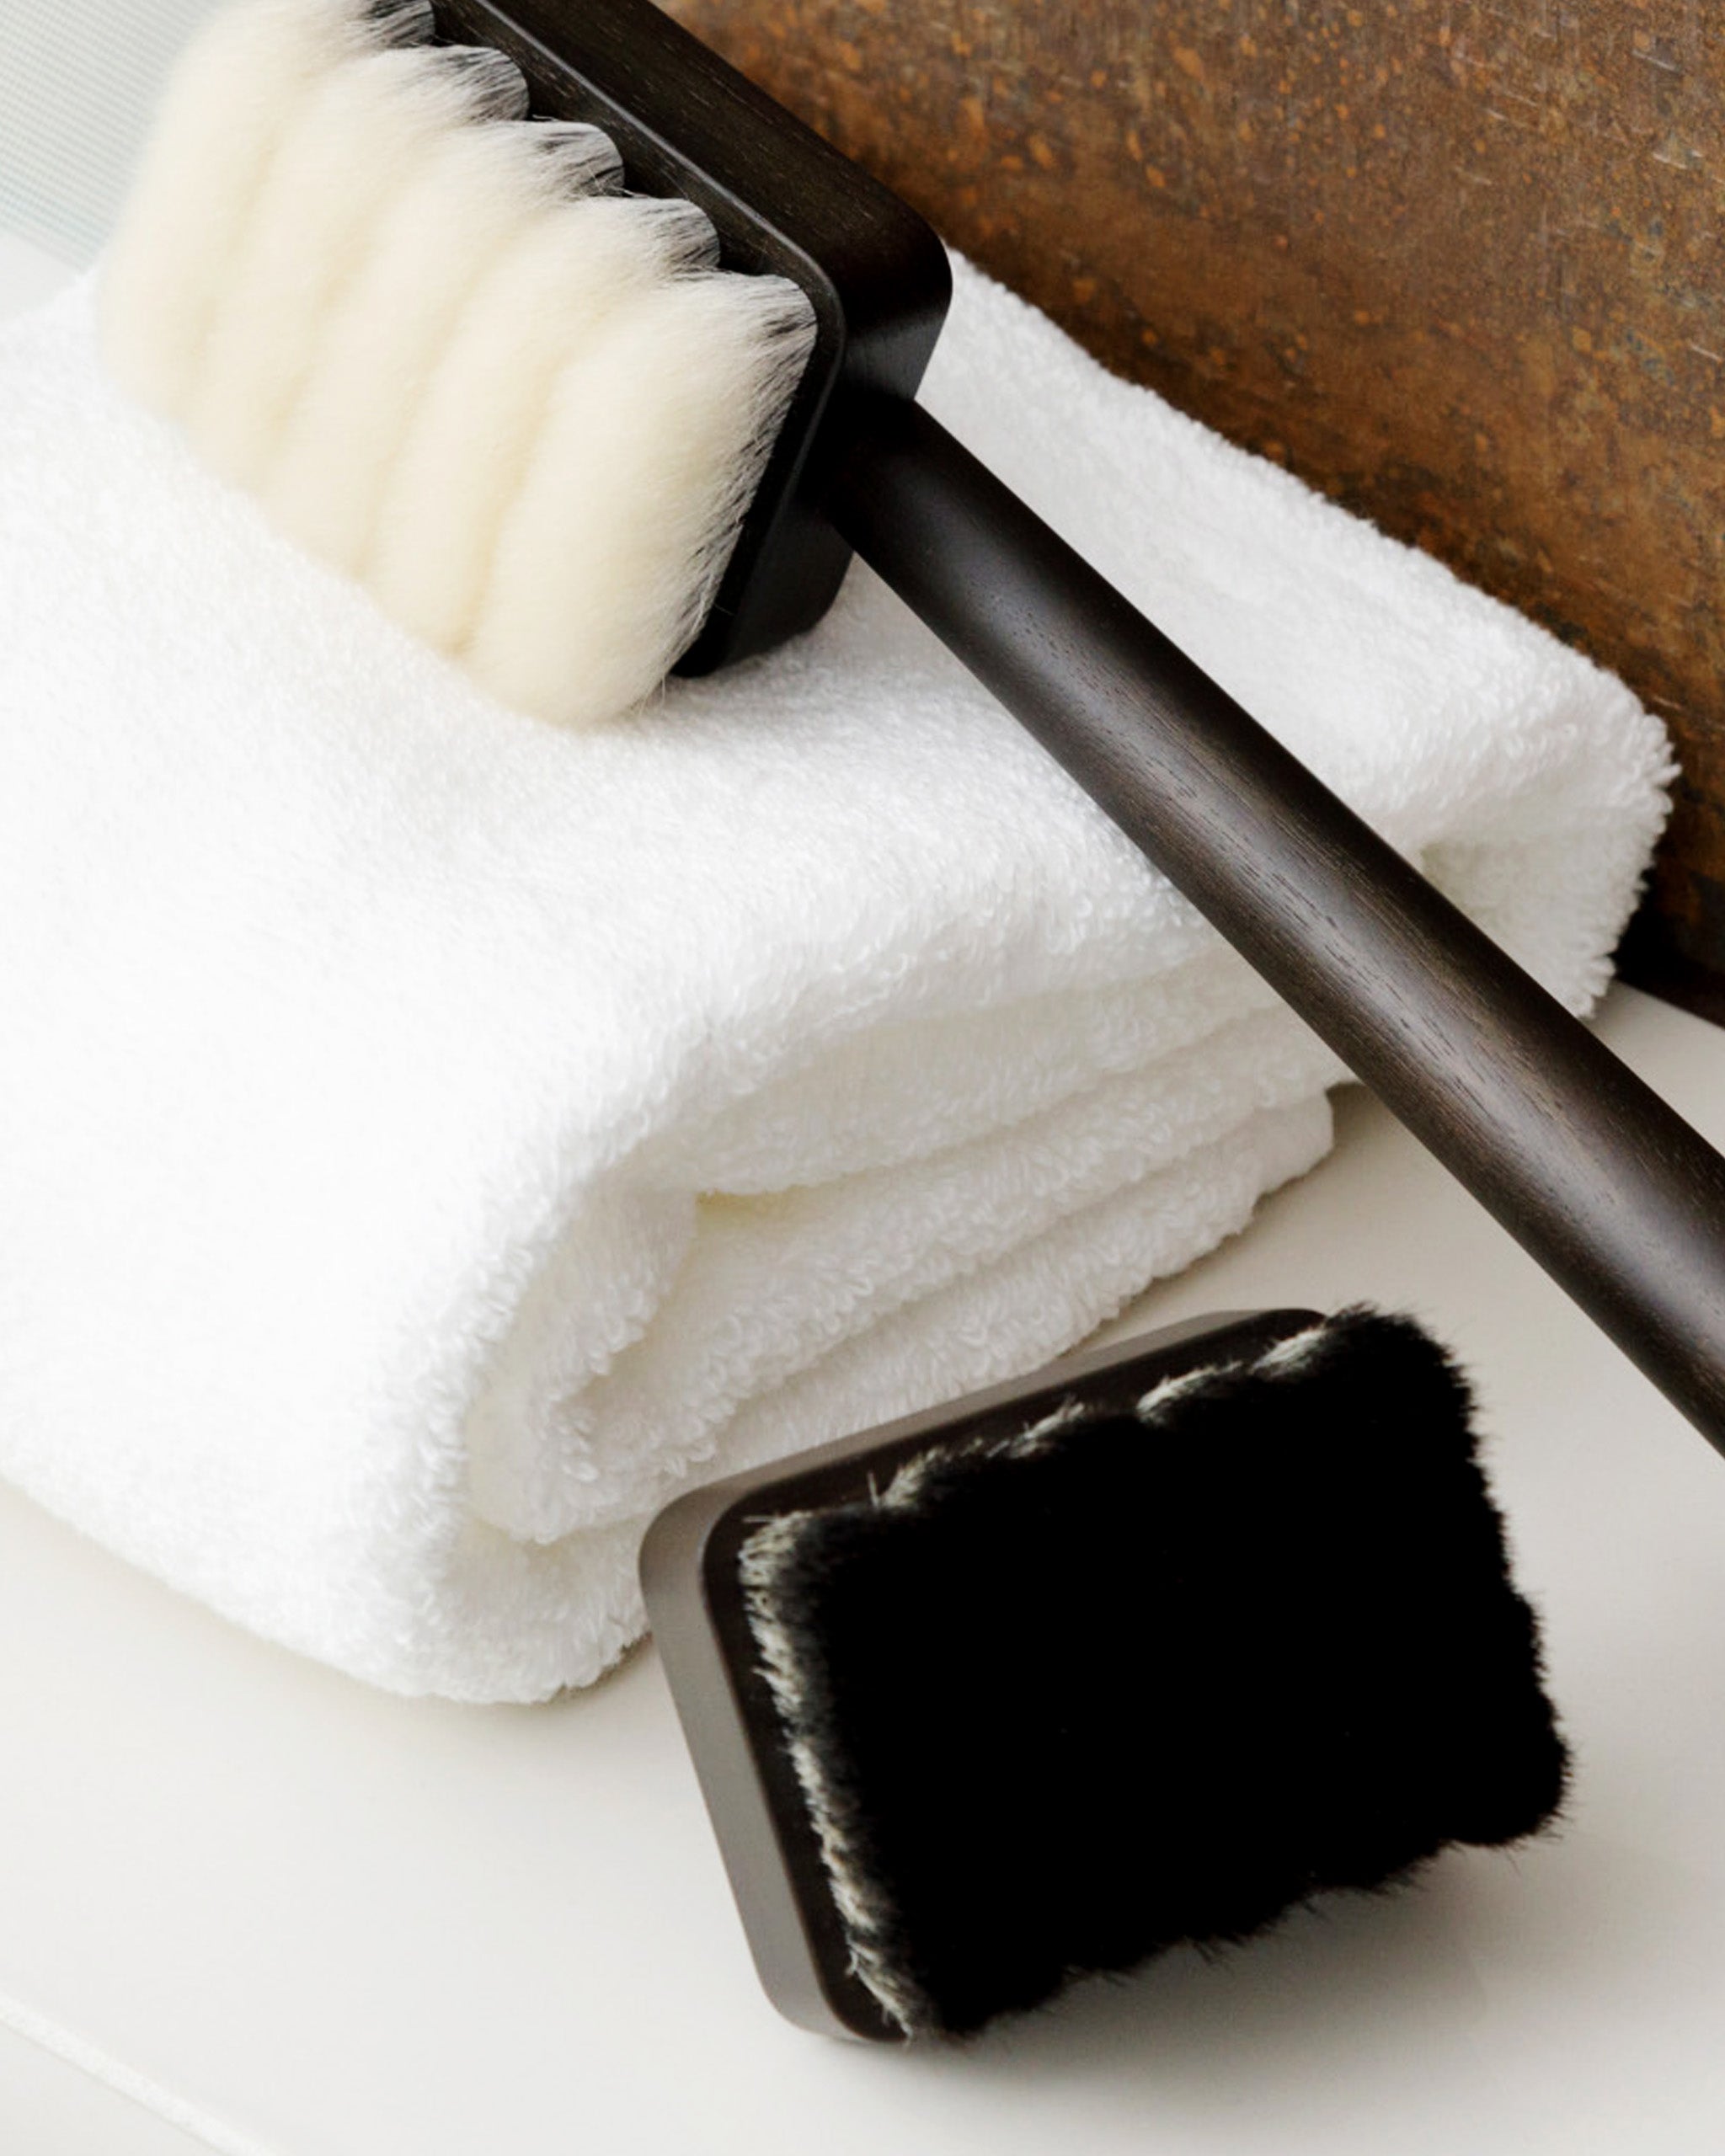 In situation image of long jiva body brush with dark wood handle and light bristles by Shaquda and short body brush with dark bristles against white towel.